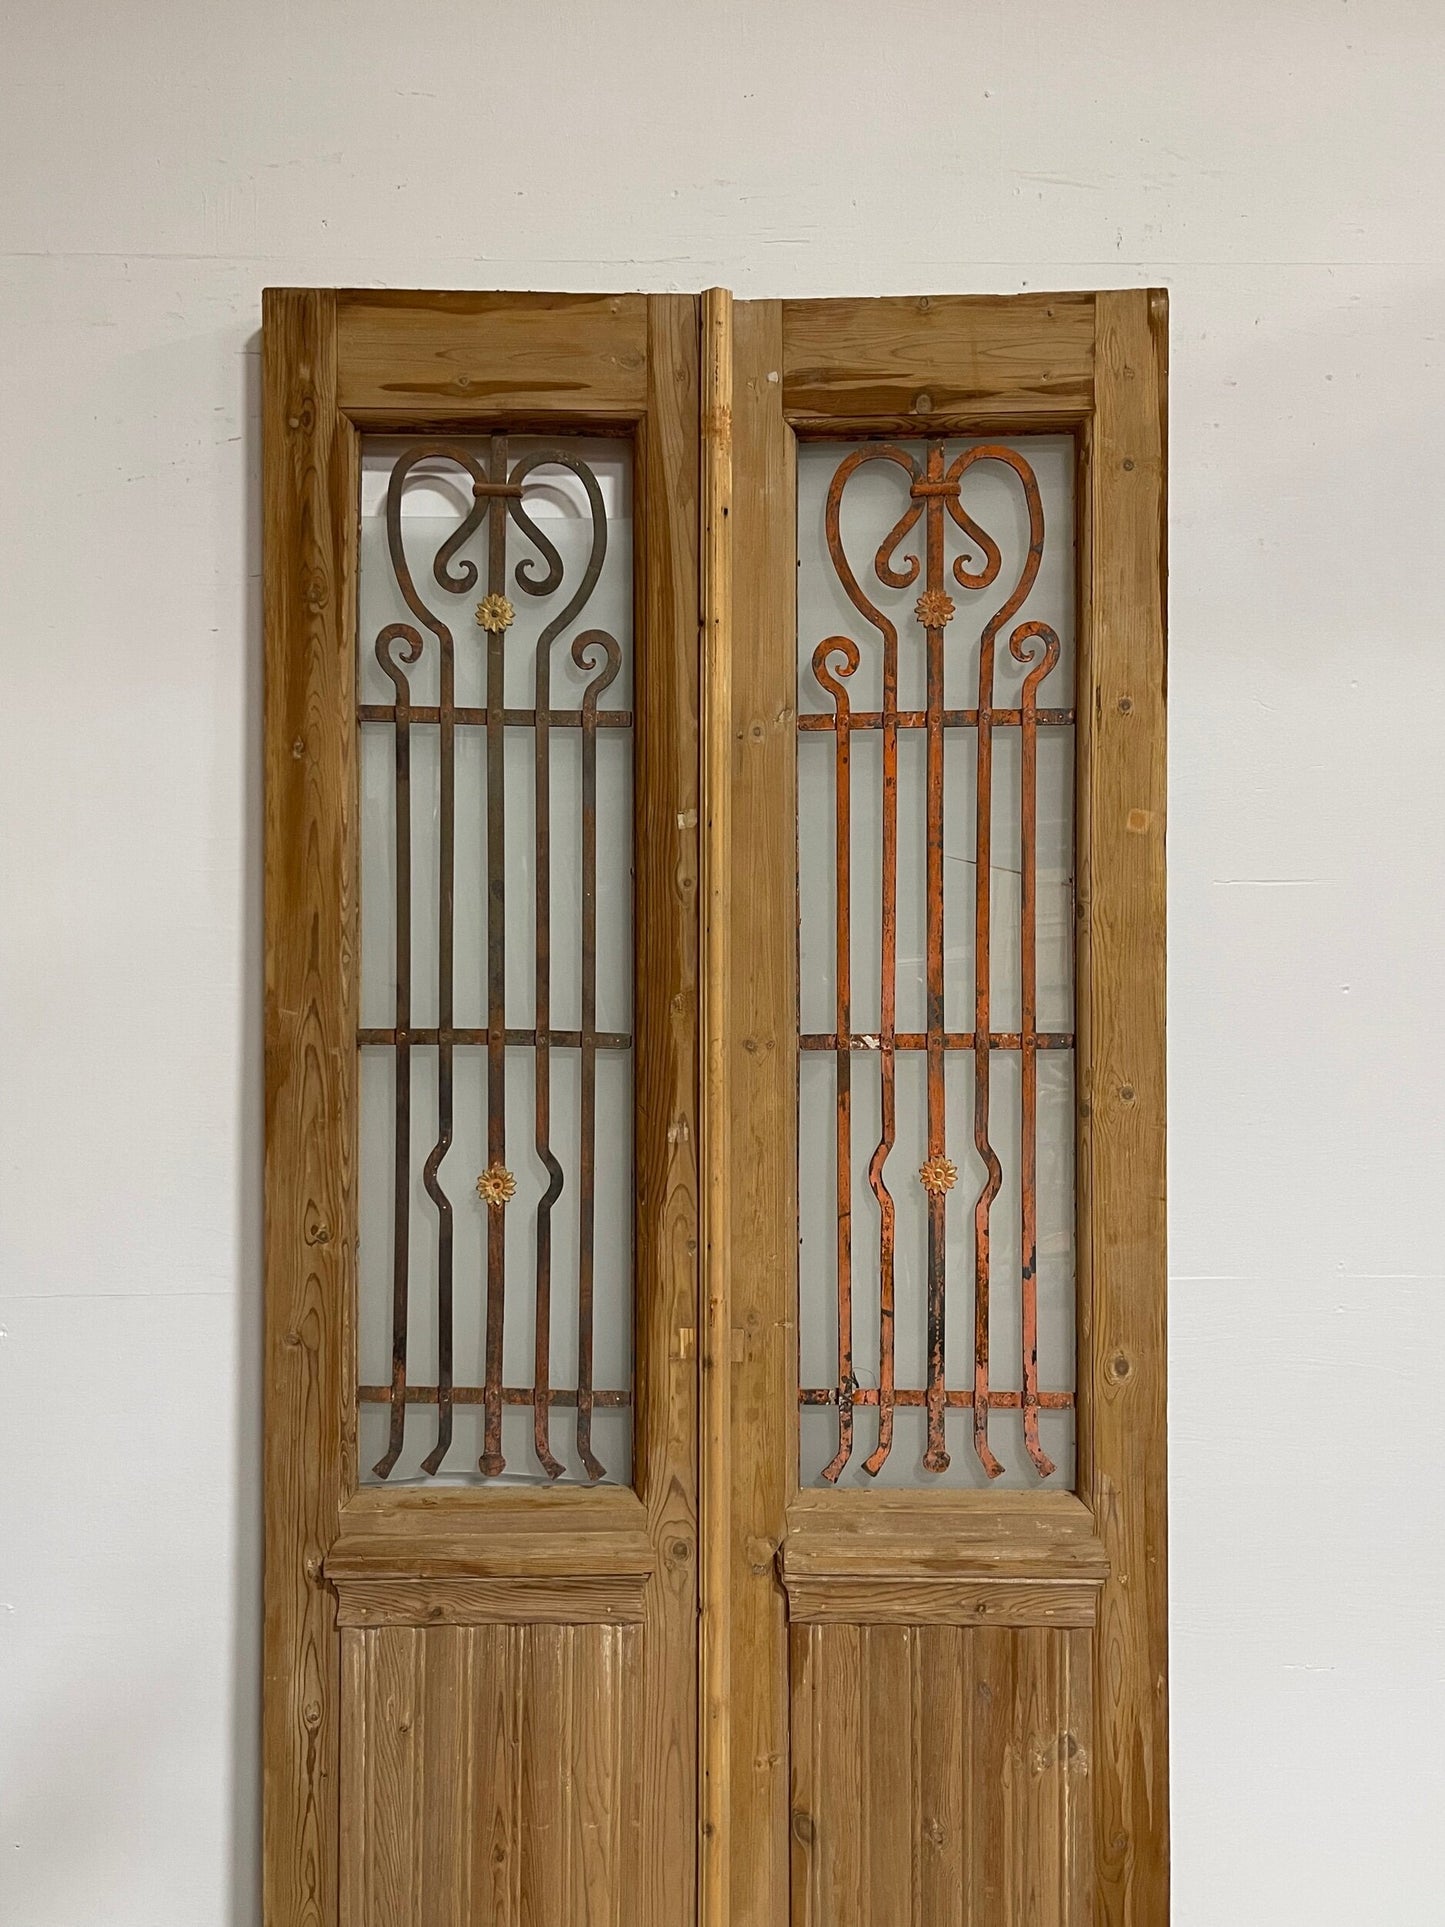 Antique french door with iron (93.25x40) G1021